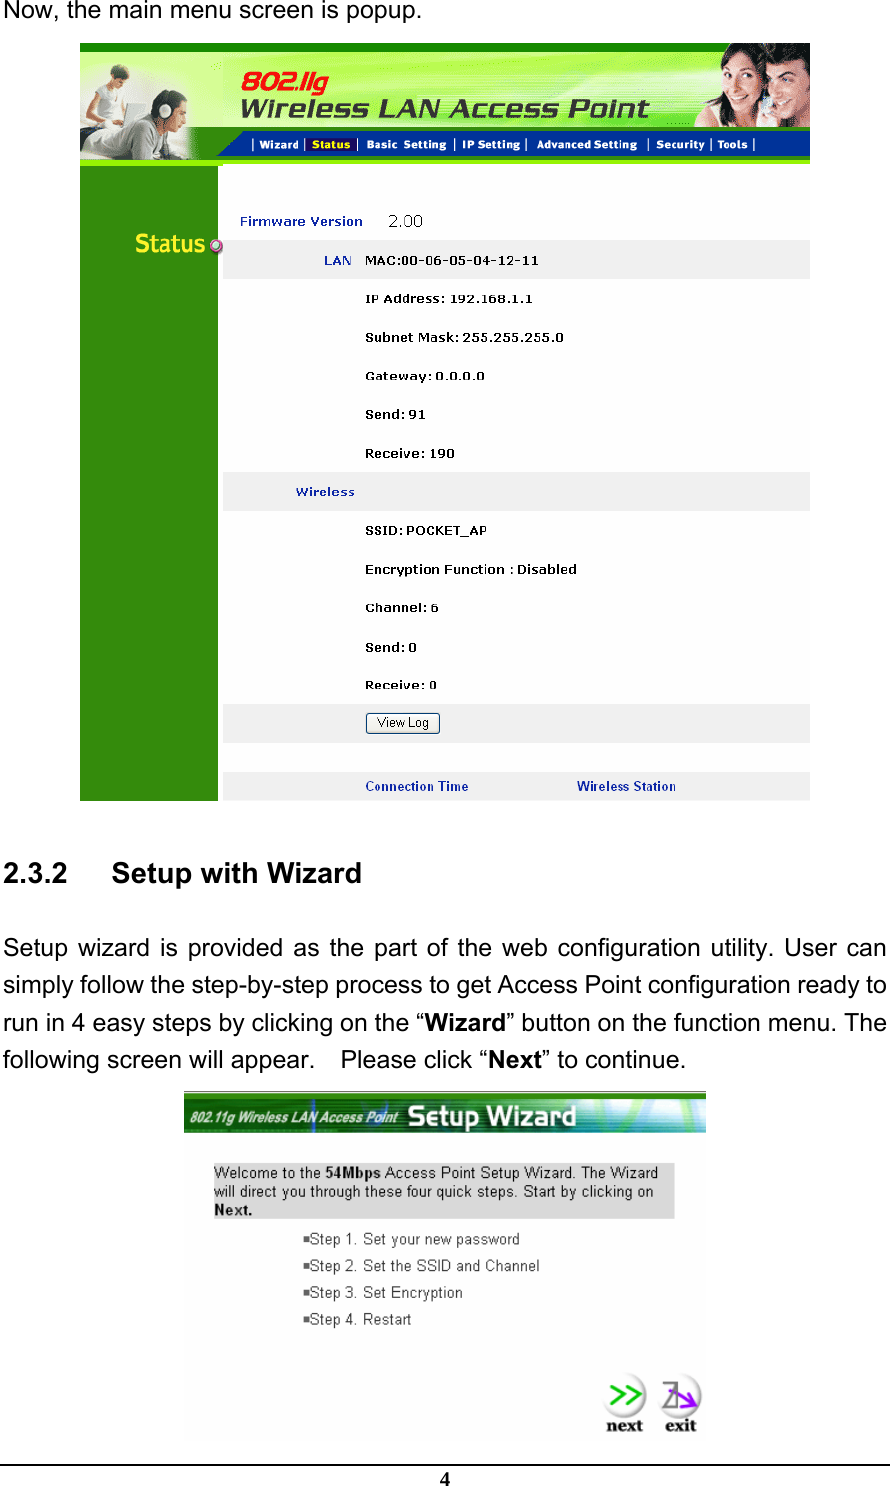 4 Now, the main menu screen is popup.  2.3.2   Setup with Wizard Setup wizard is provided as the part of the web configuration utility. User can simply follow the step-by-step process to get Access Point configuration ready to run in 4 easy steps by clicking on the “Wizard” button on the function menu. The following screen will appear.    Please click “Next” to continue.  